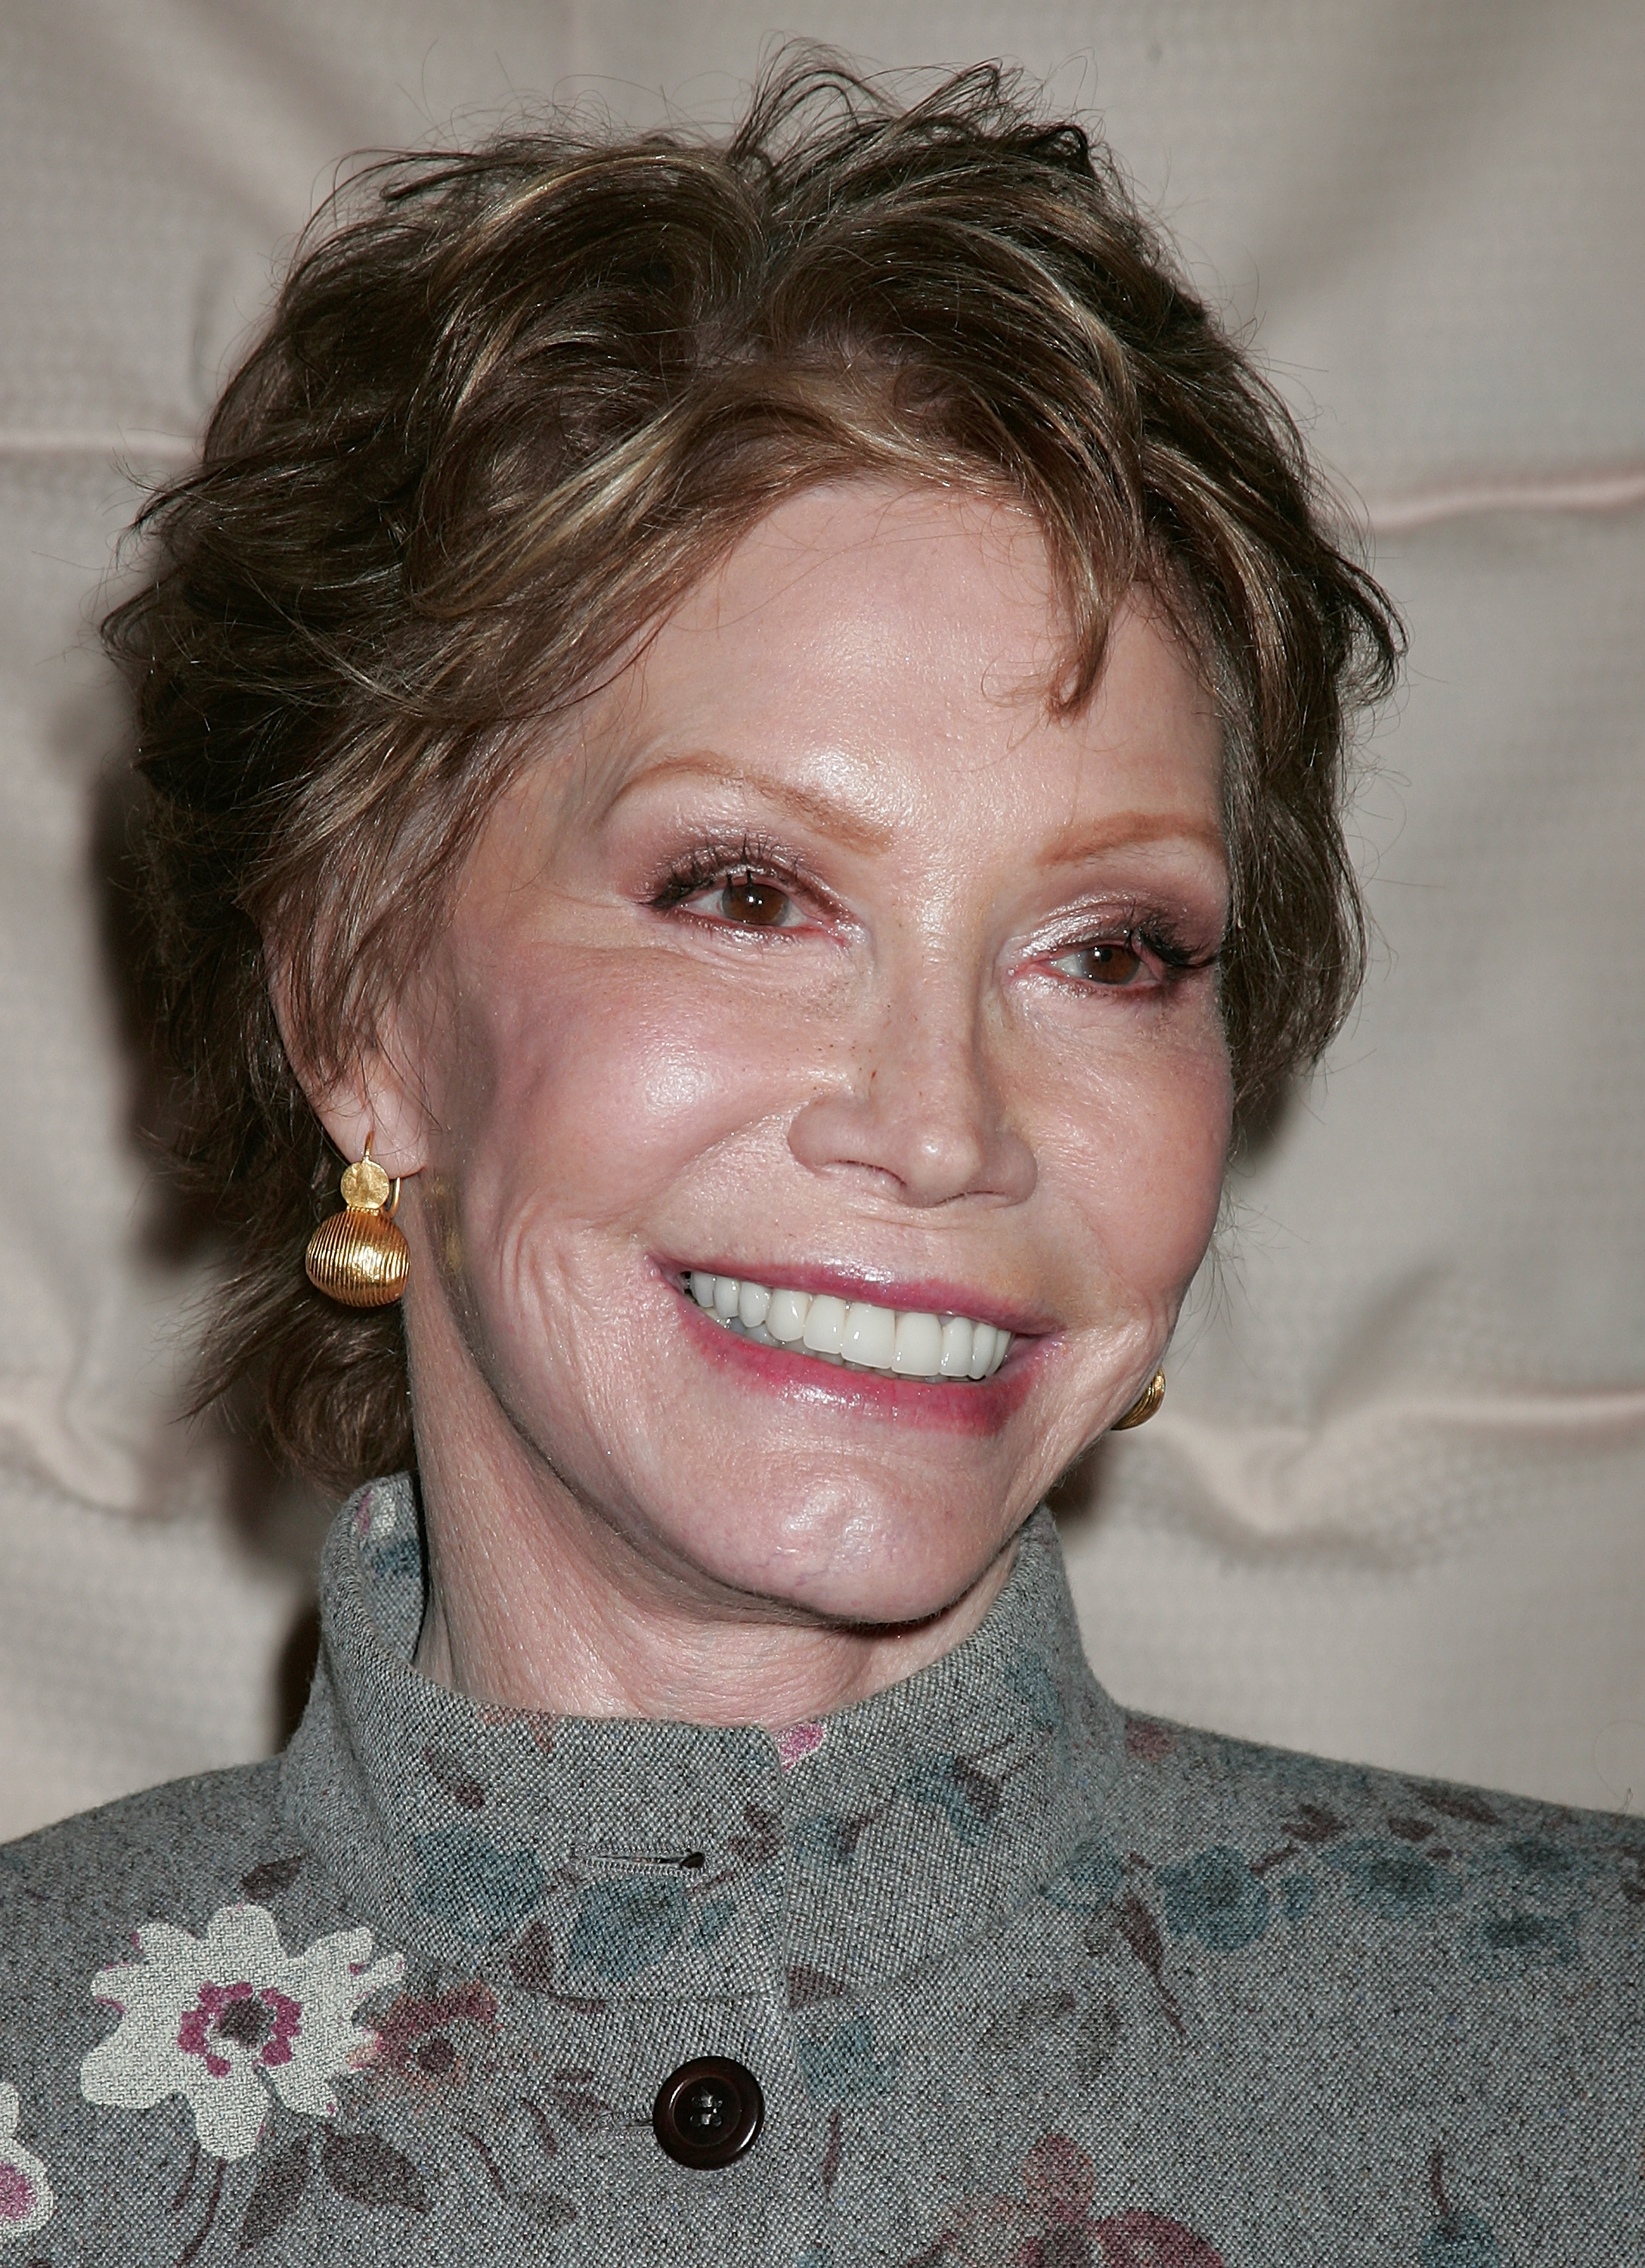 Mary Tyler Moore attends the Pacific Pioneer Broadcasters luncheon at the Sportsmen's Lodge on March 21, 2008 in Studio City, California | Source: Getty Images